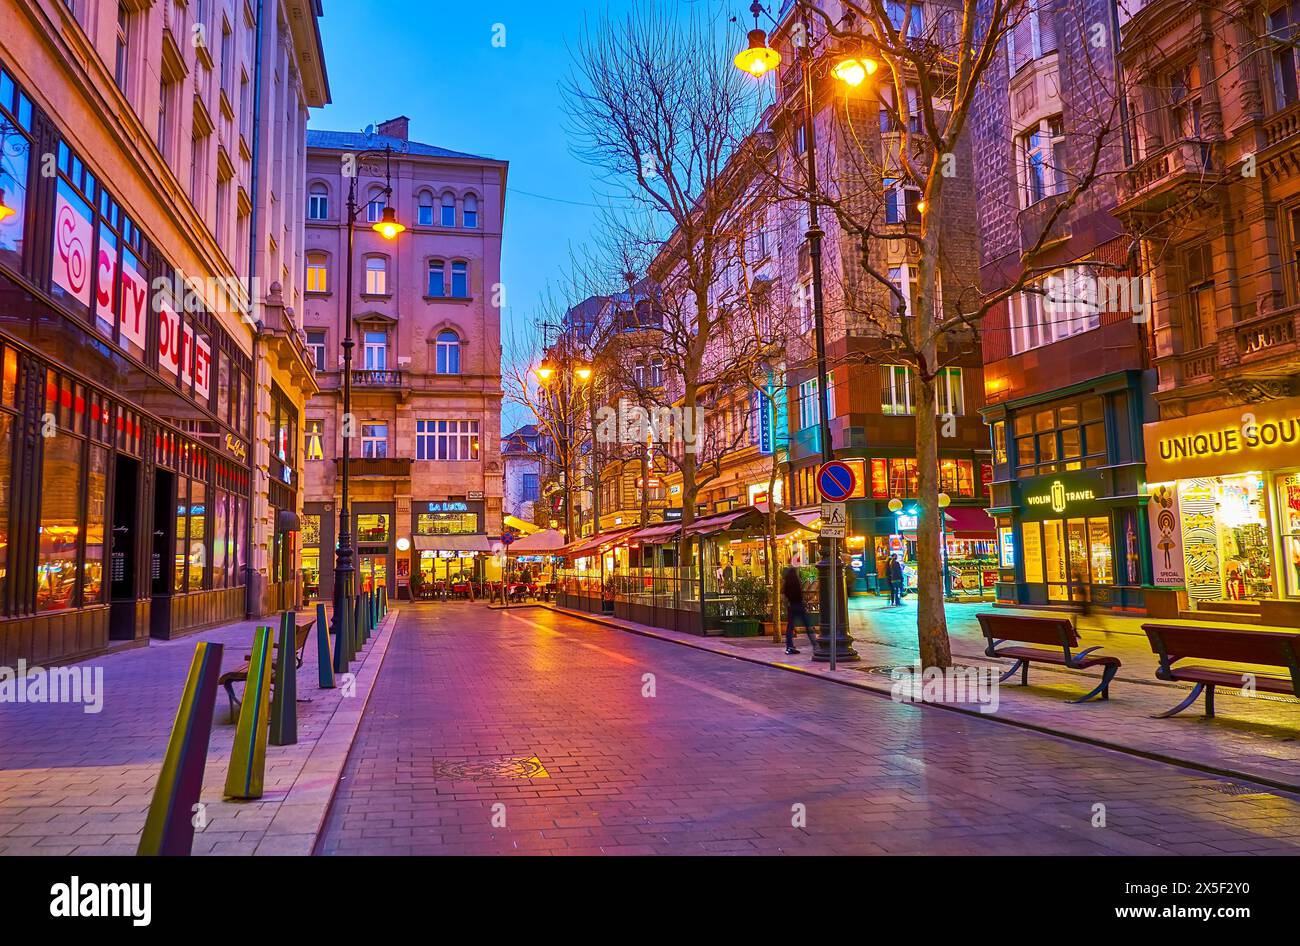 BUDAPEST, HUNGARY - MARCH 3, 2022: The famous tourist Vaci Street in bright evening lights, Budapest, Hungary Stock Photo